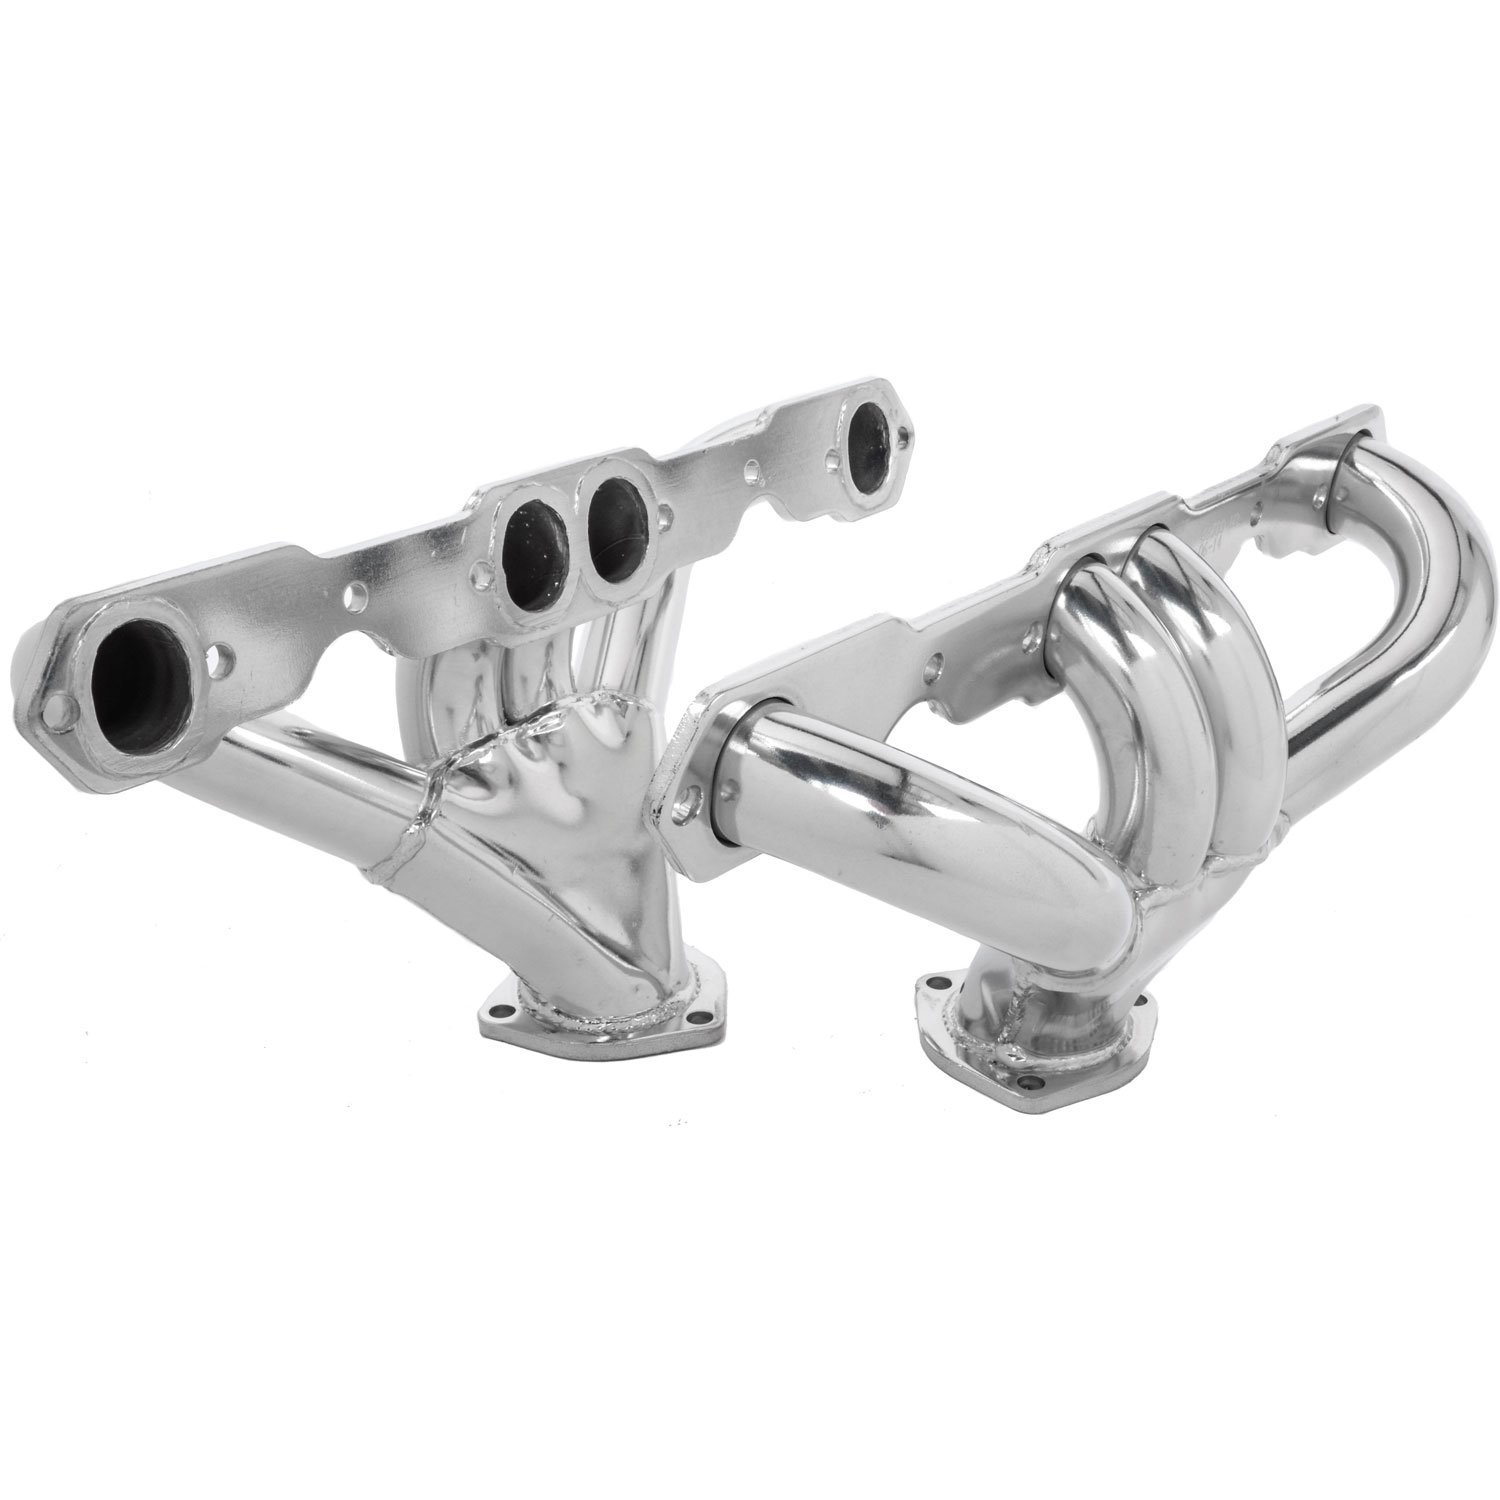 Street Rod Tight Tubes Headers For Chevy 283-400